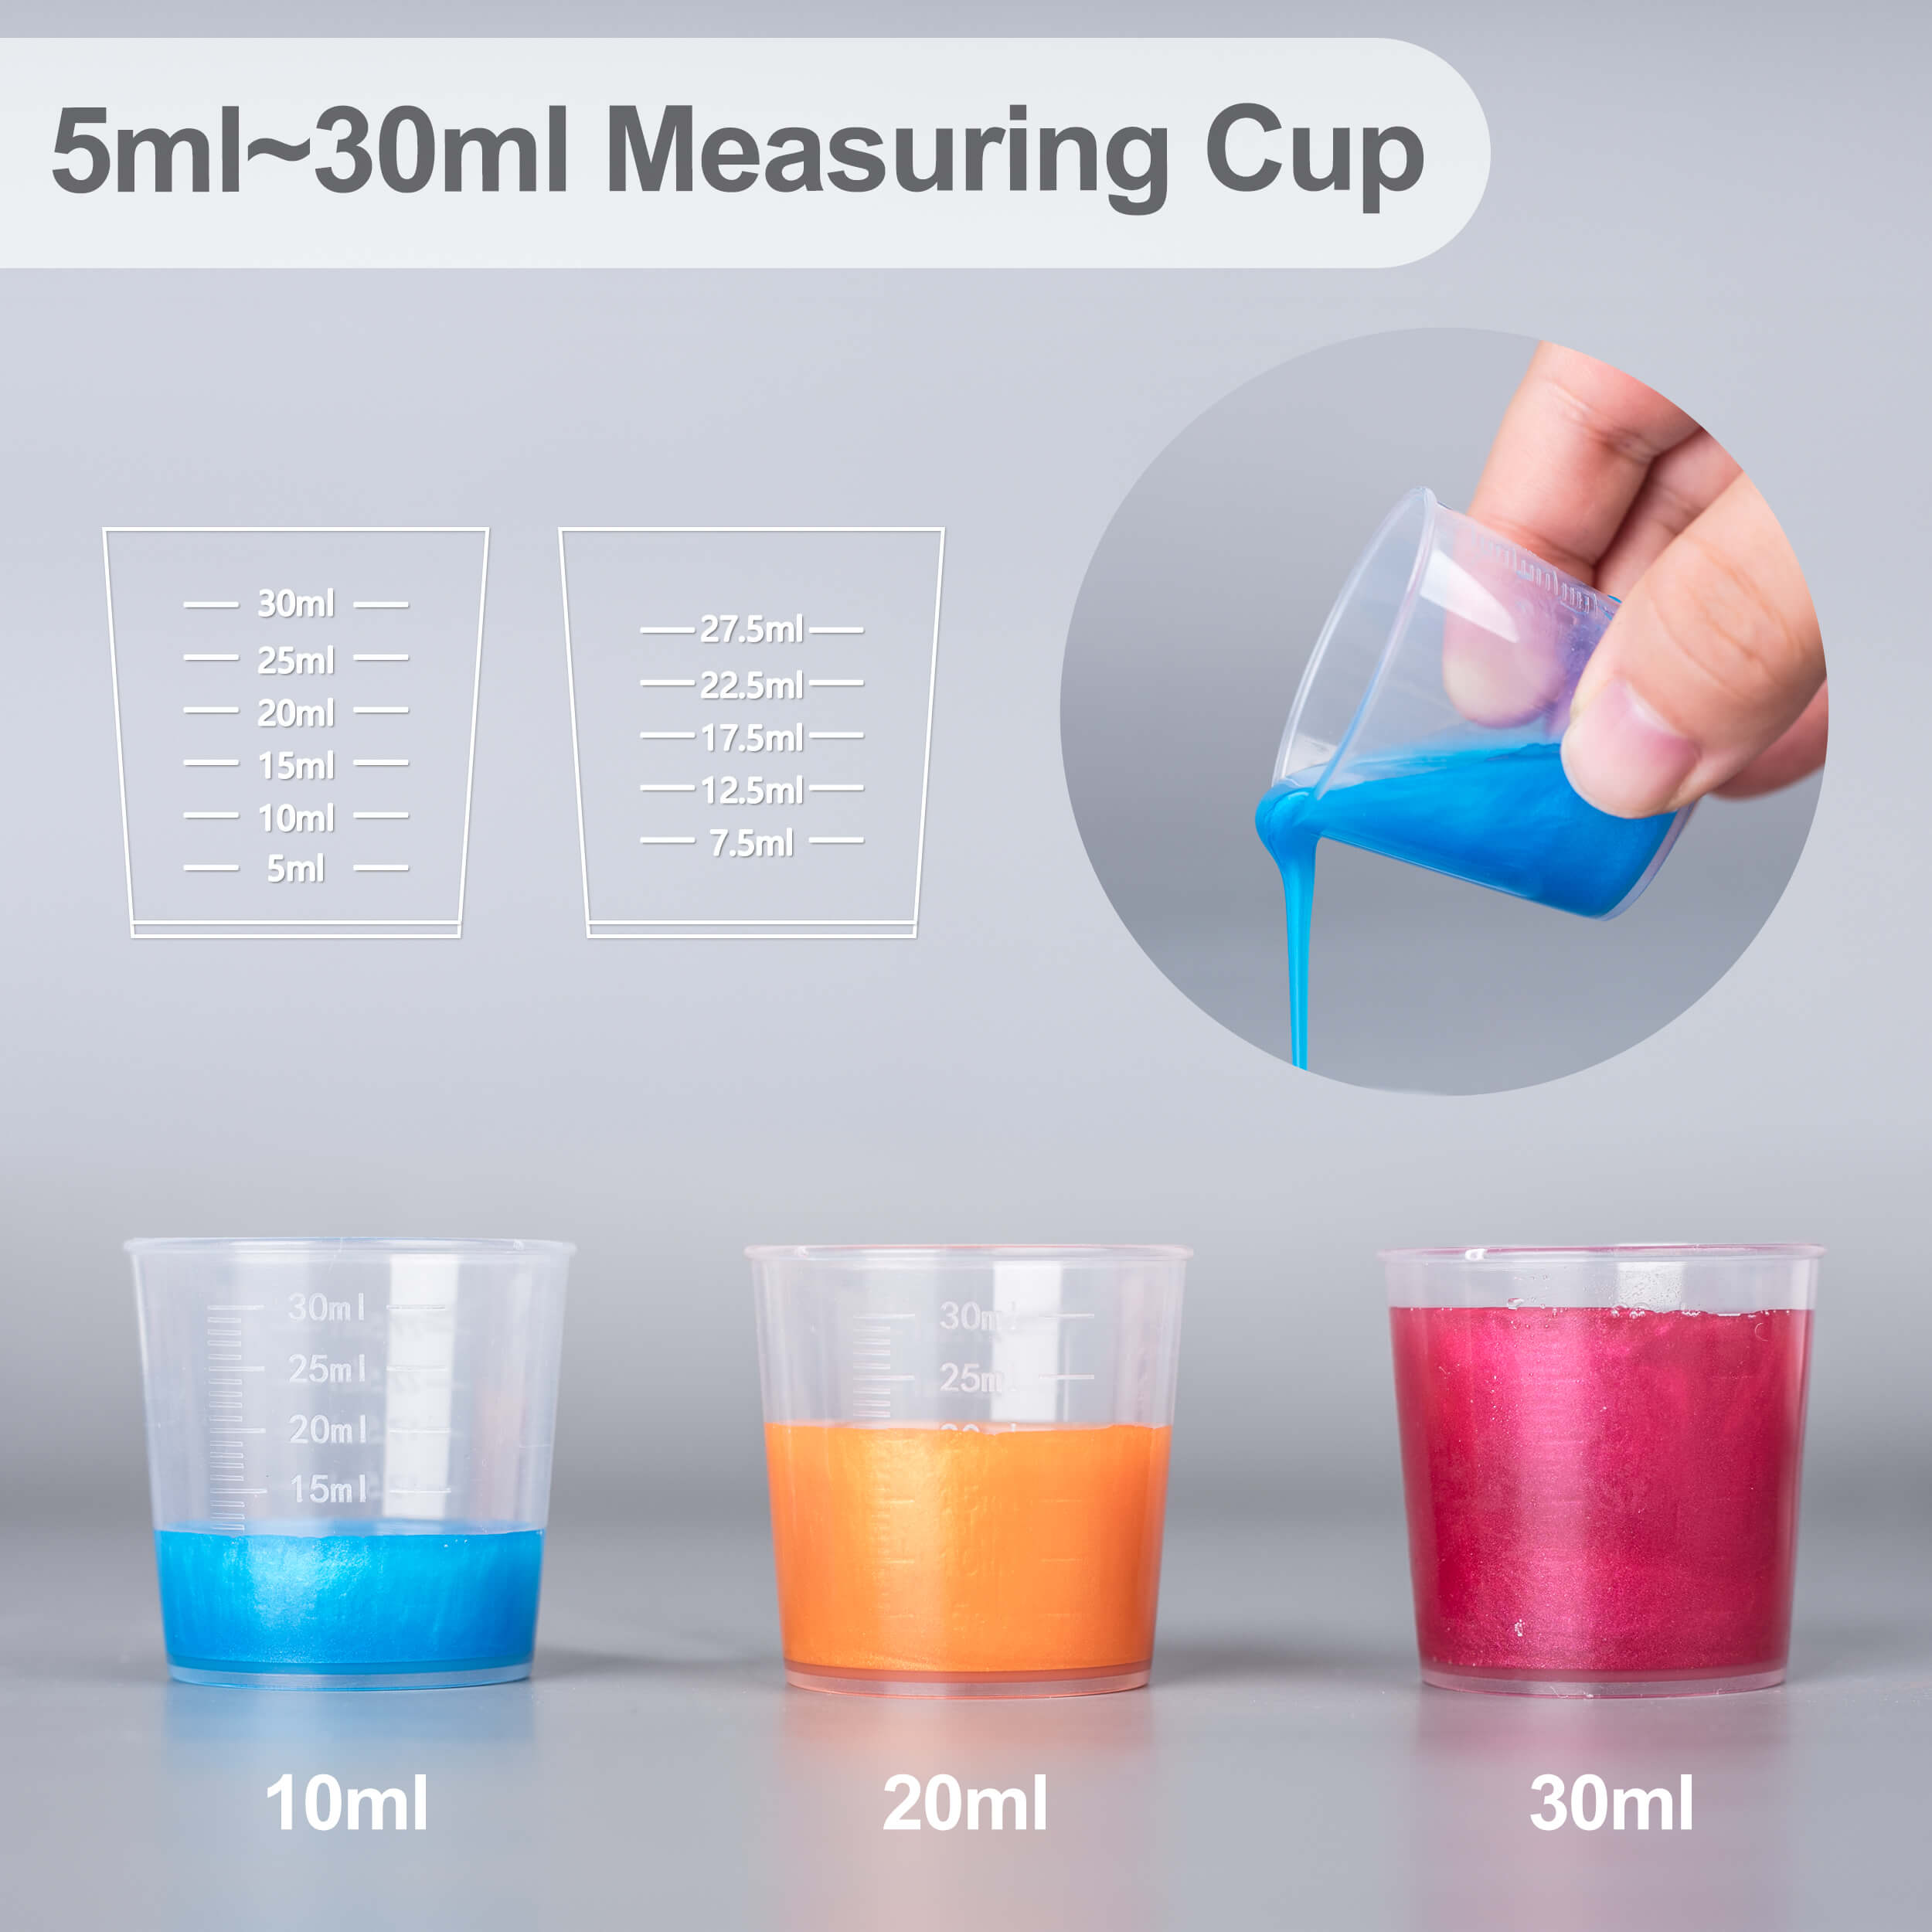  LET'S RESIN Silicone Measuring Cups, 450ml Accurate 2